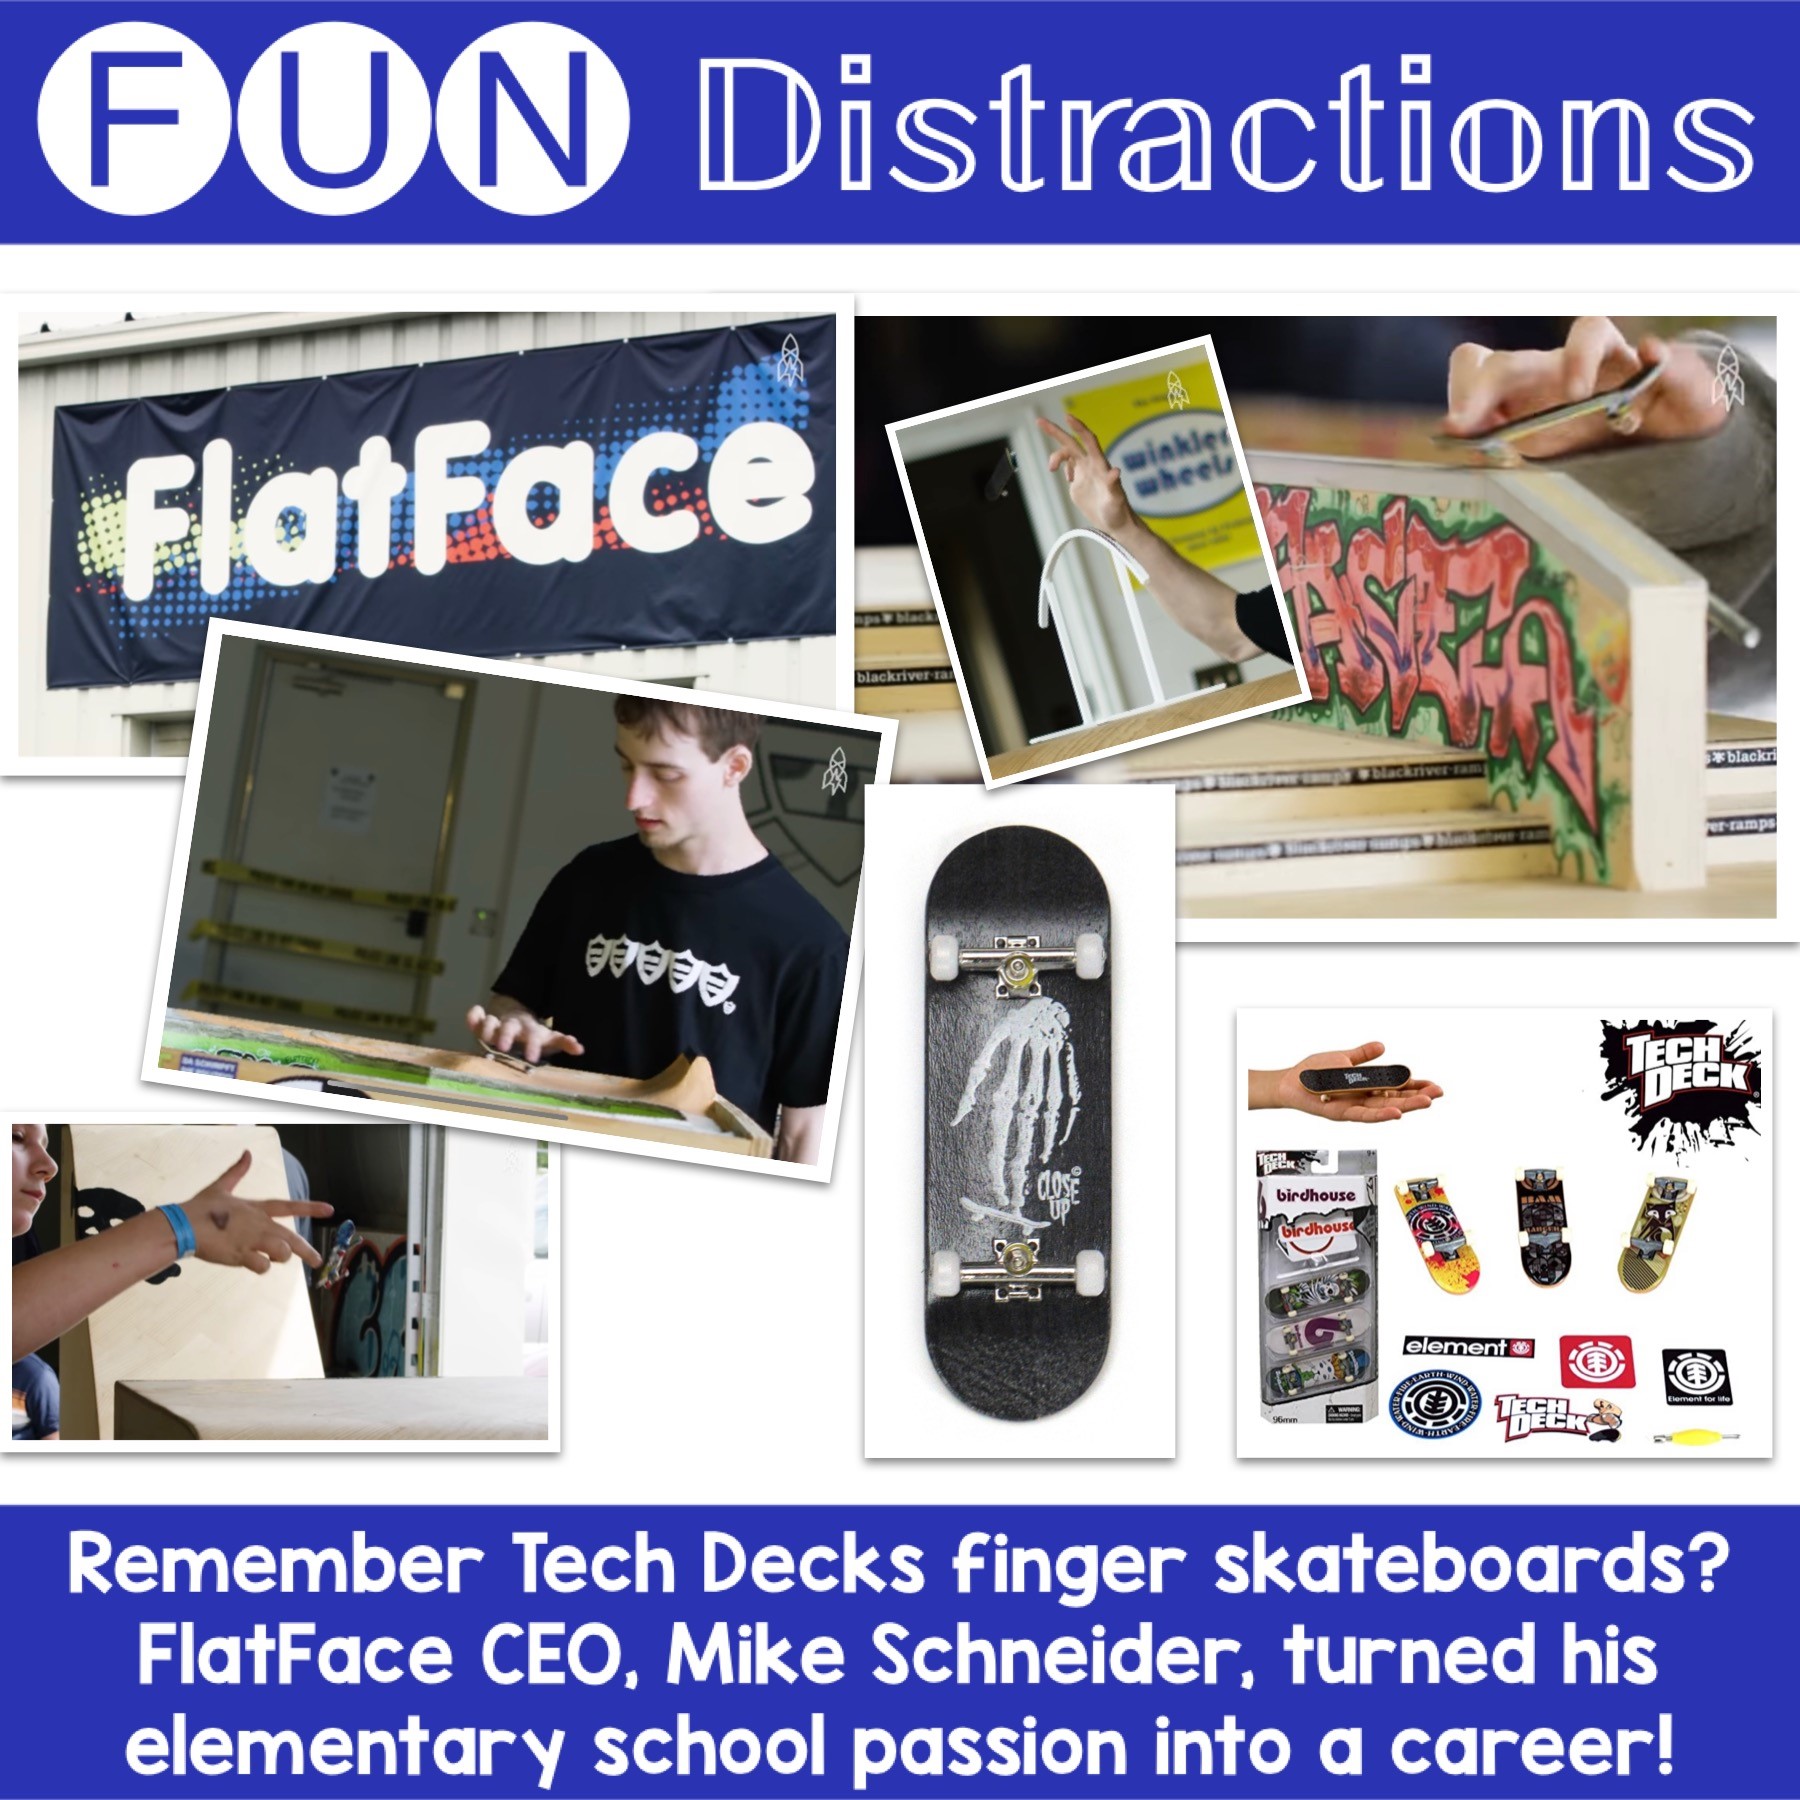 Image advertising the Library’s FUN Distractions series post about FlatFace fingerboards